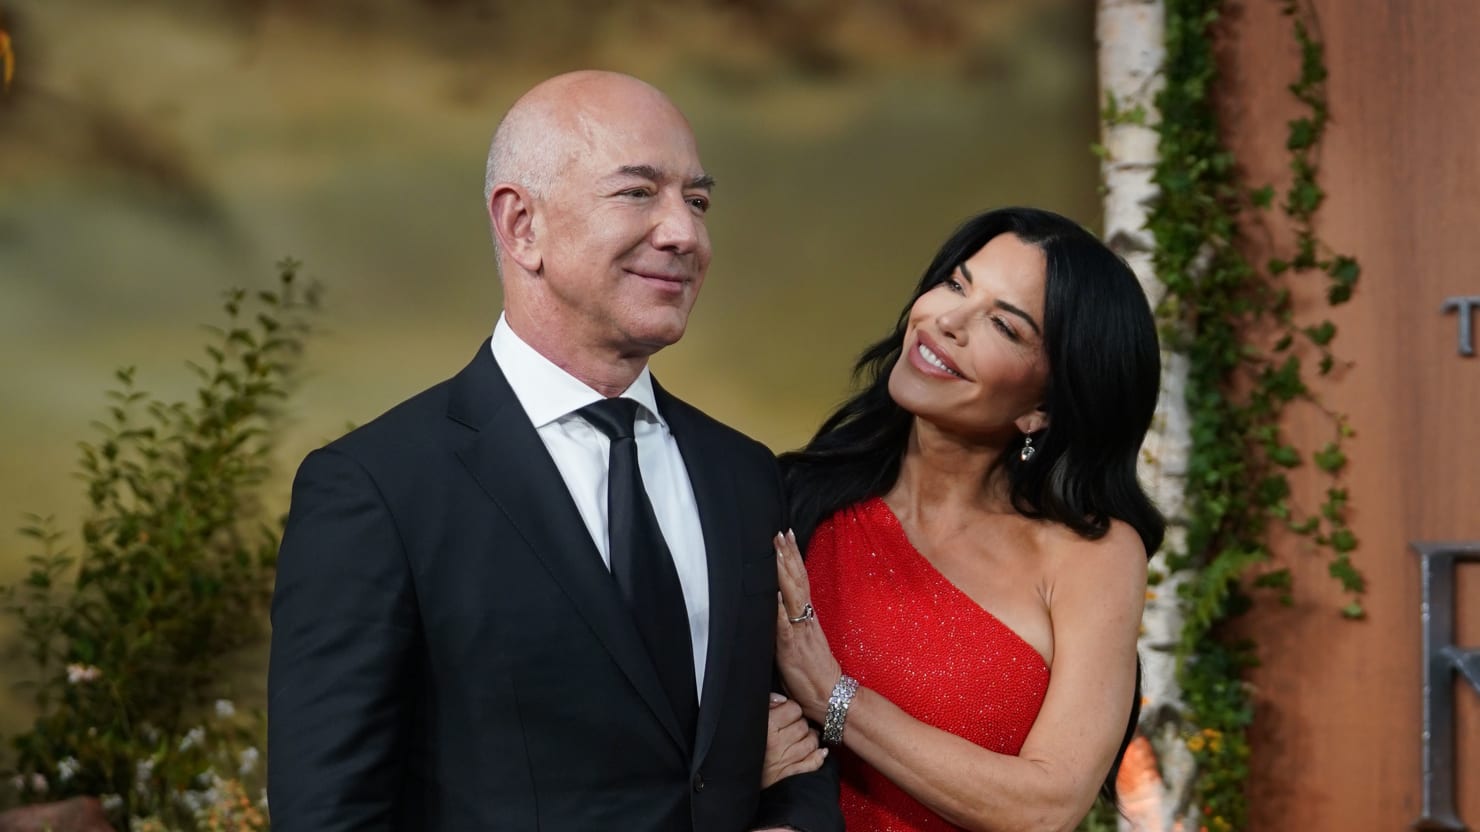 5 Things We Just Learned About the Bezos-Sánchez Romance